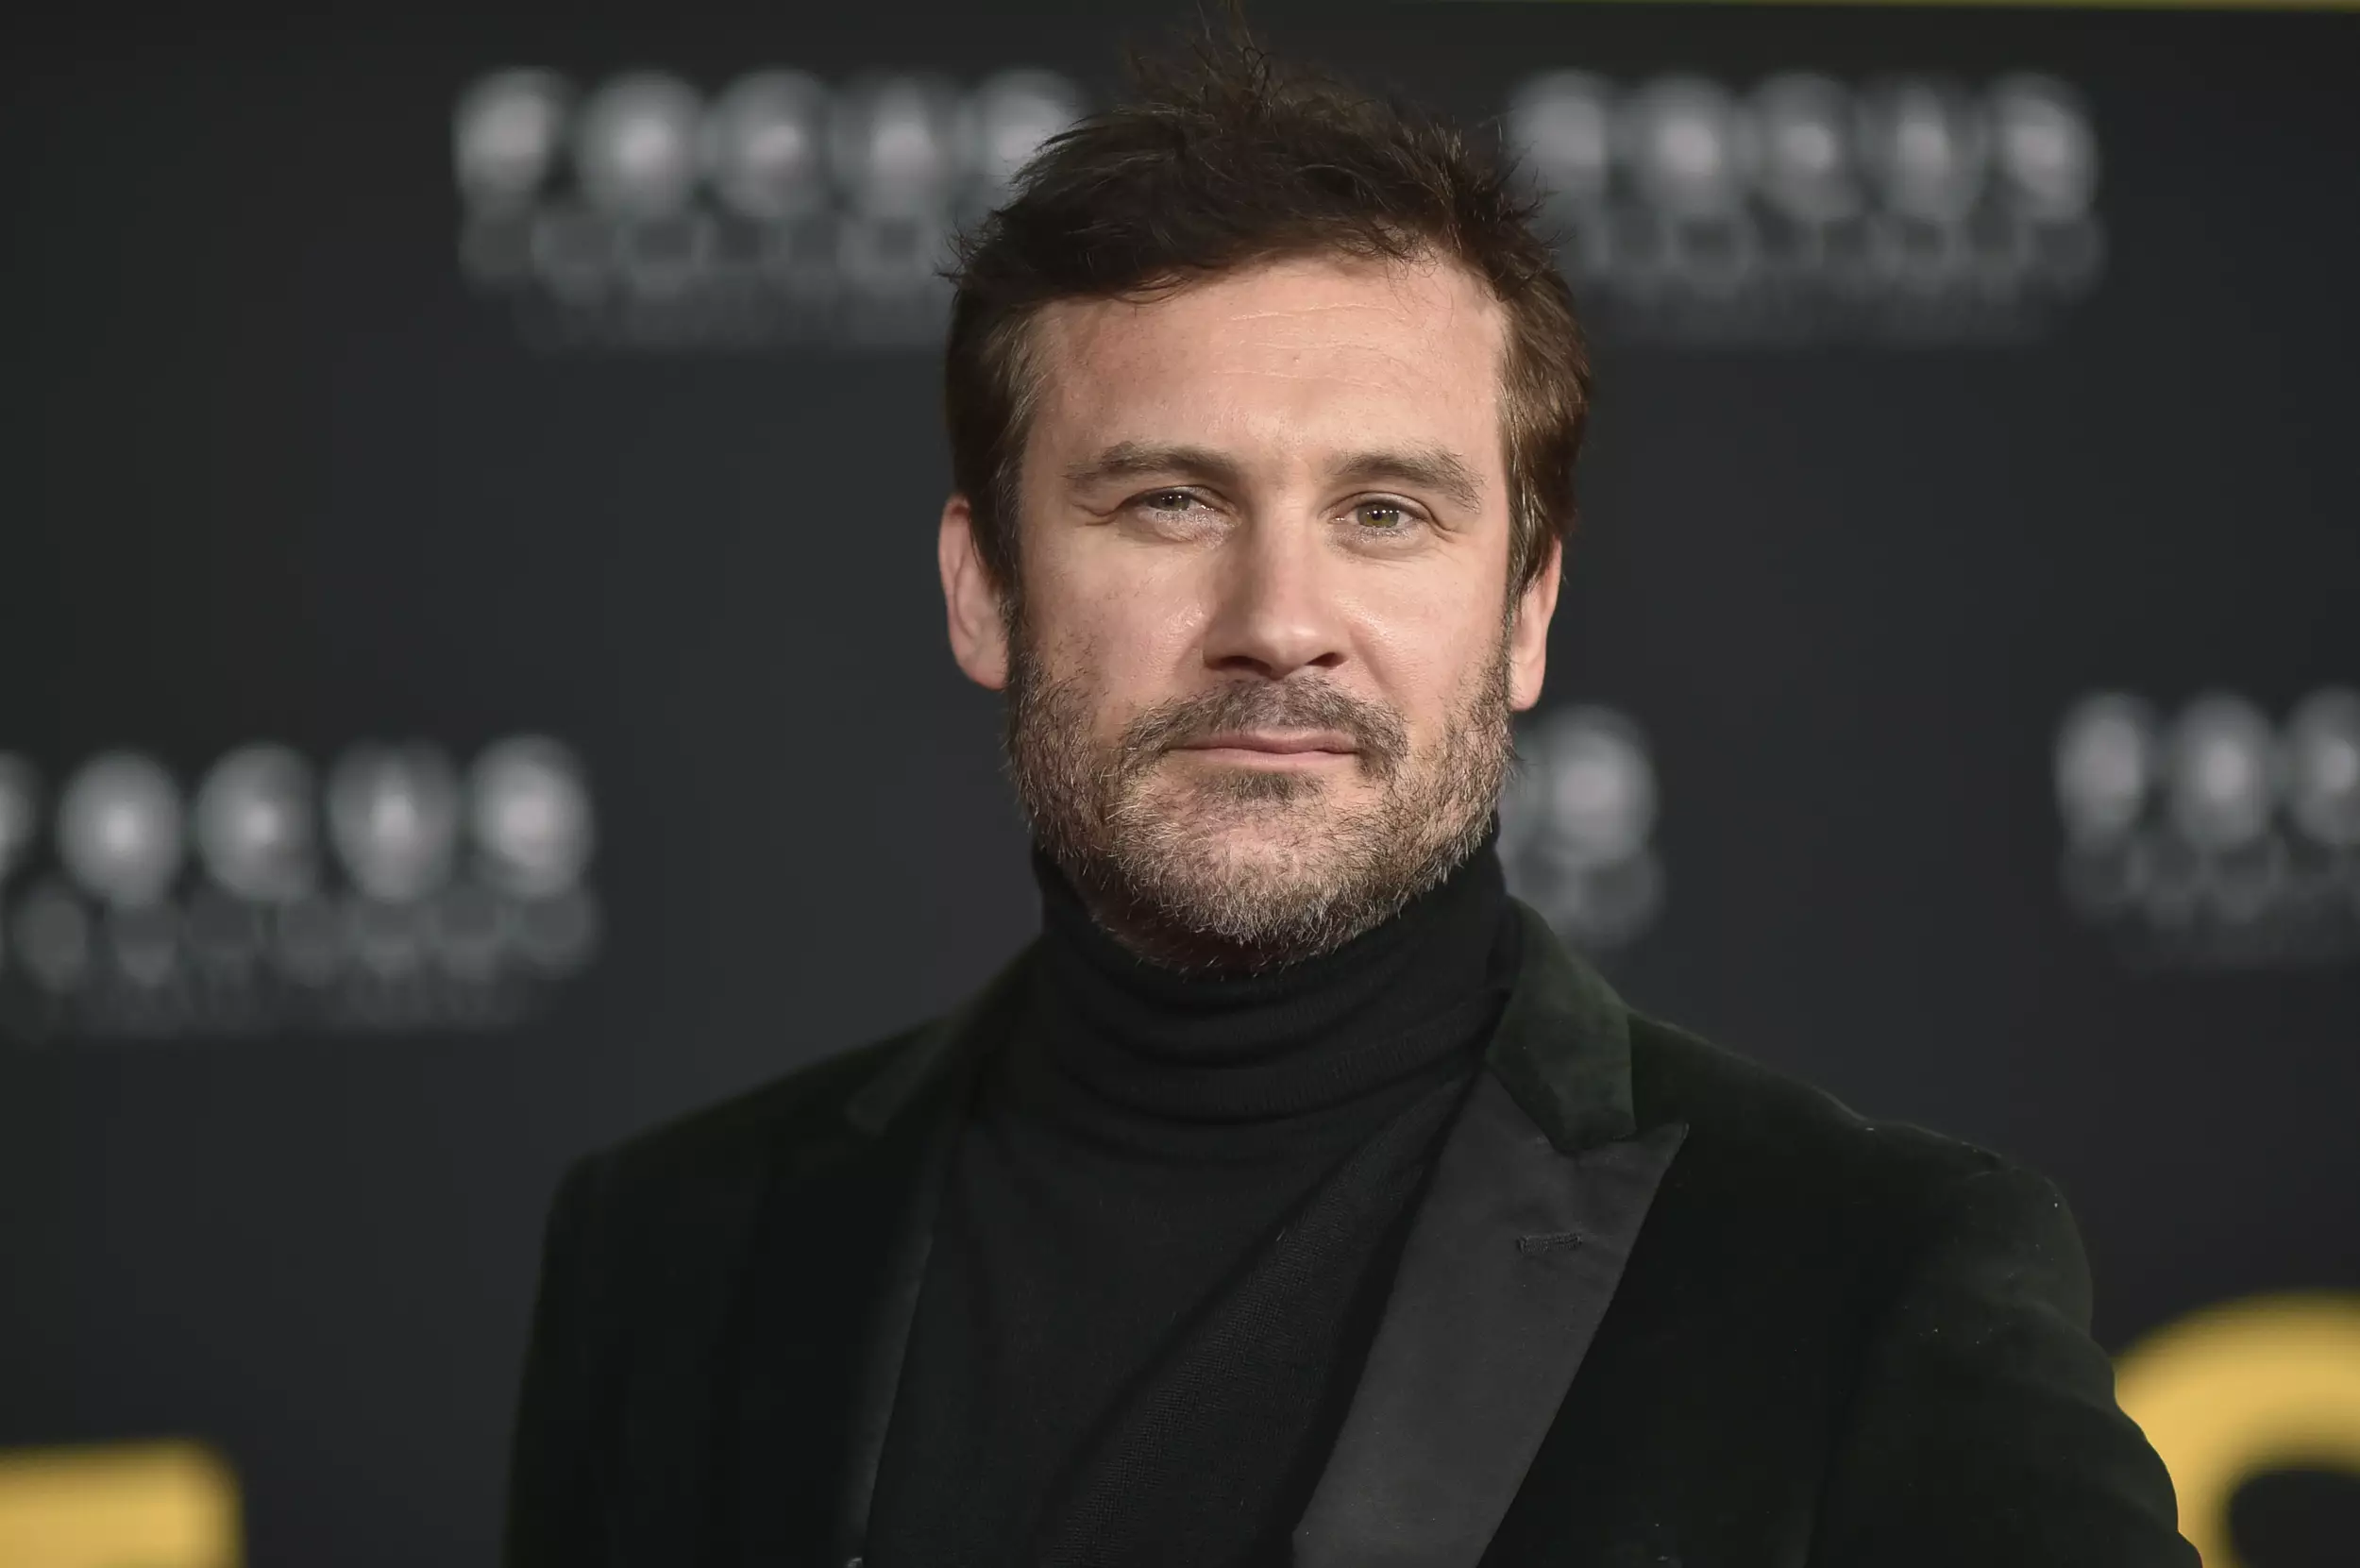 Clive Standen is also in the running for the 007 role. (